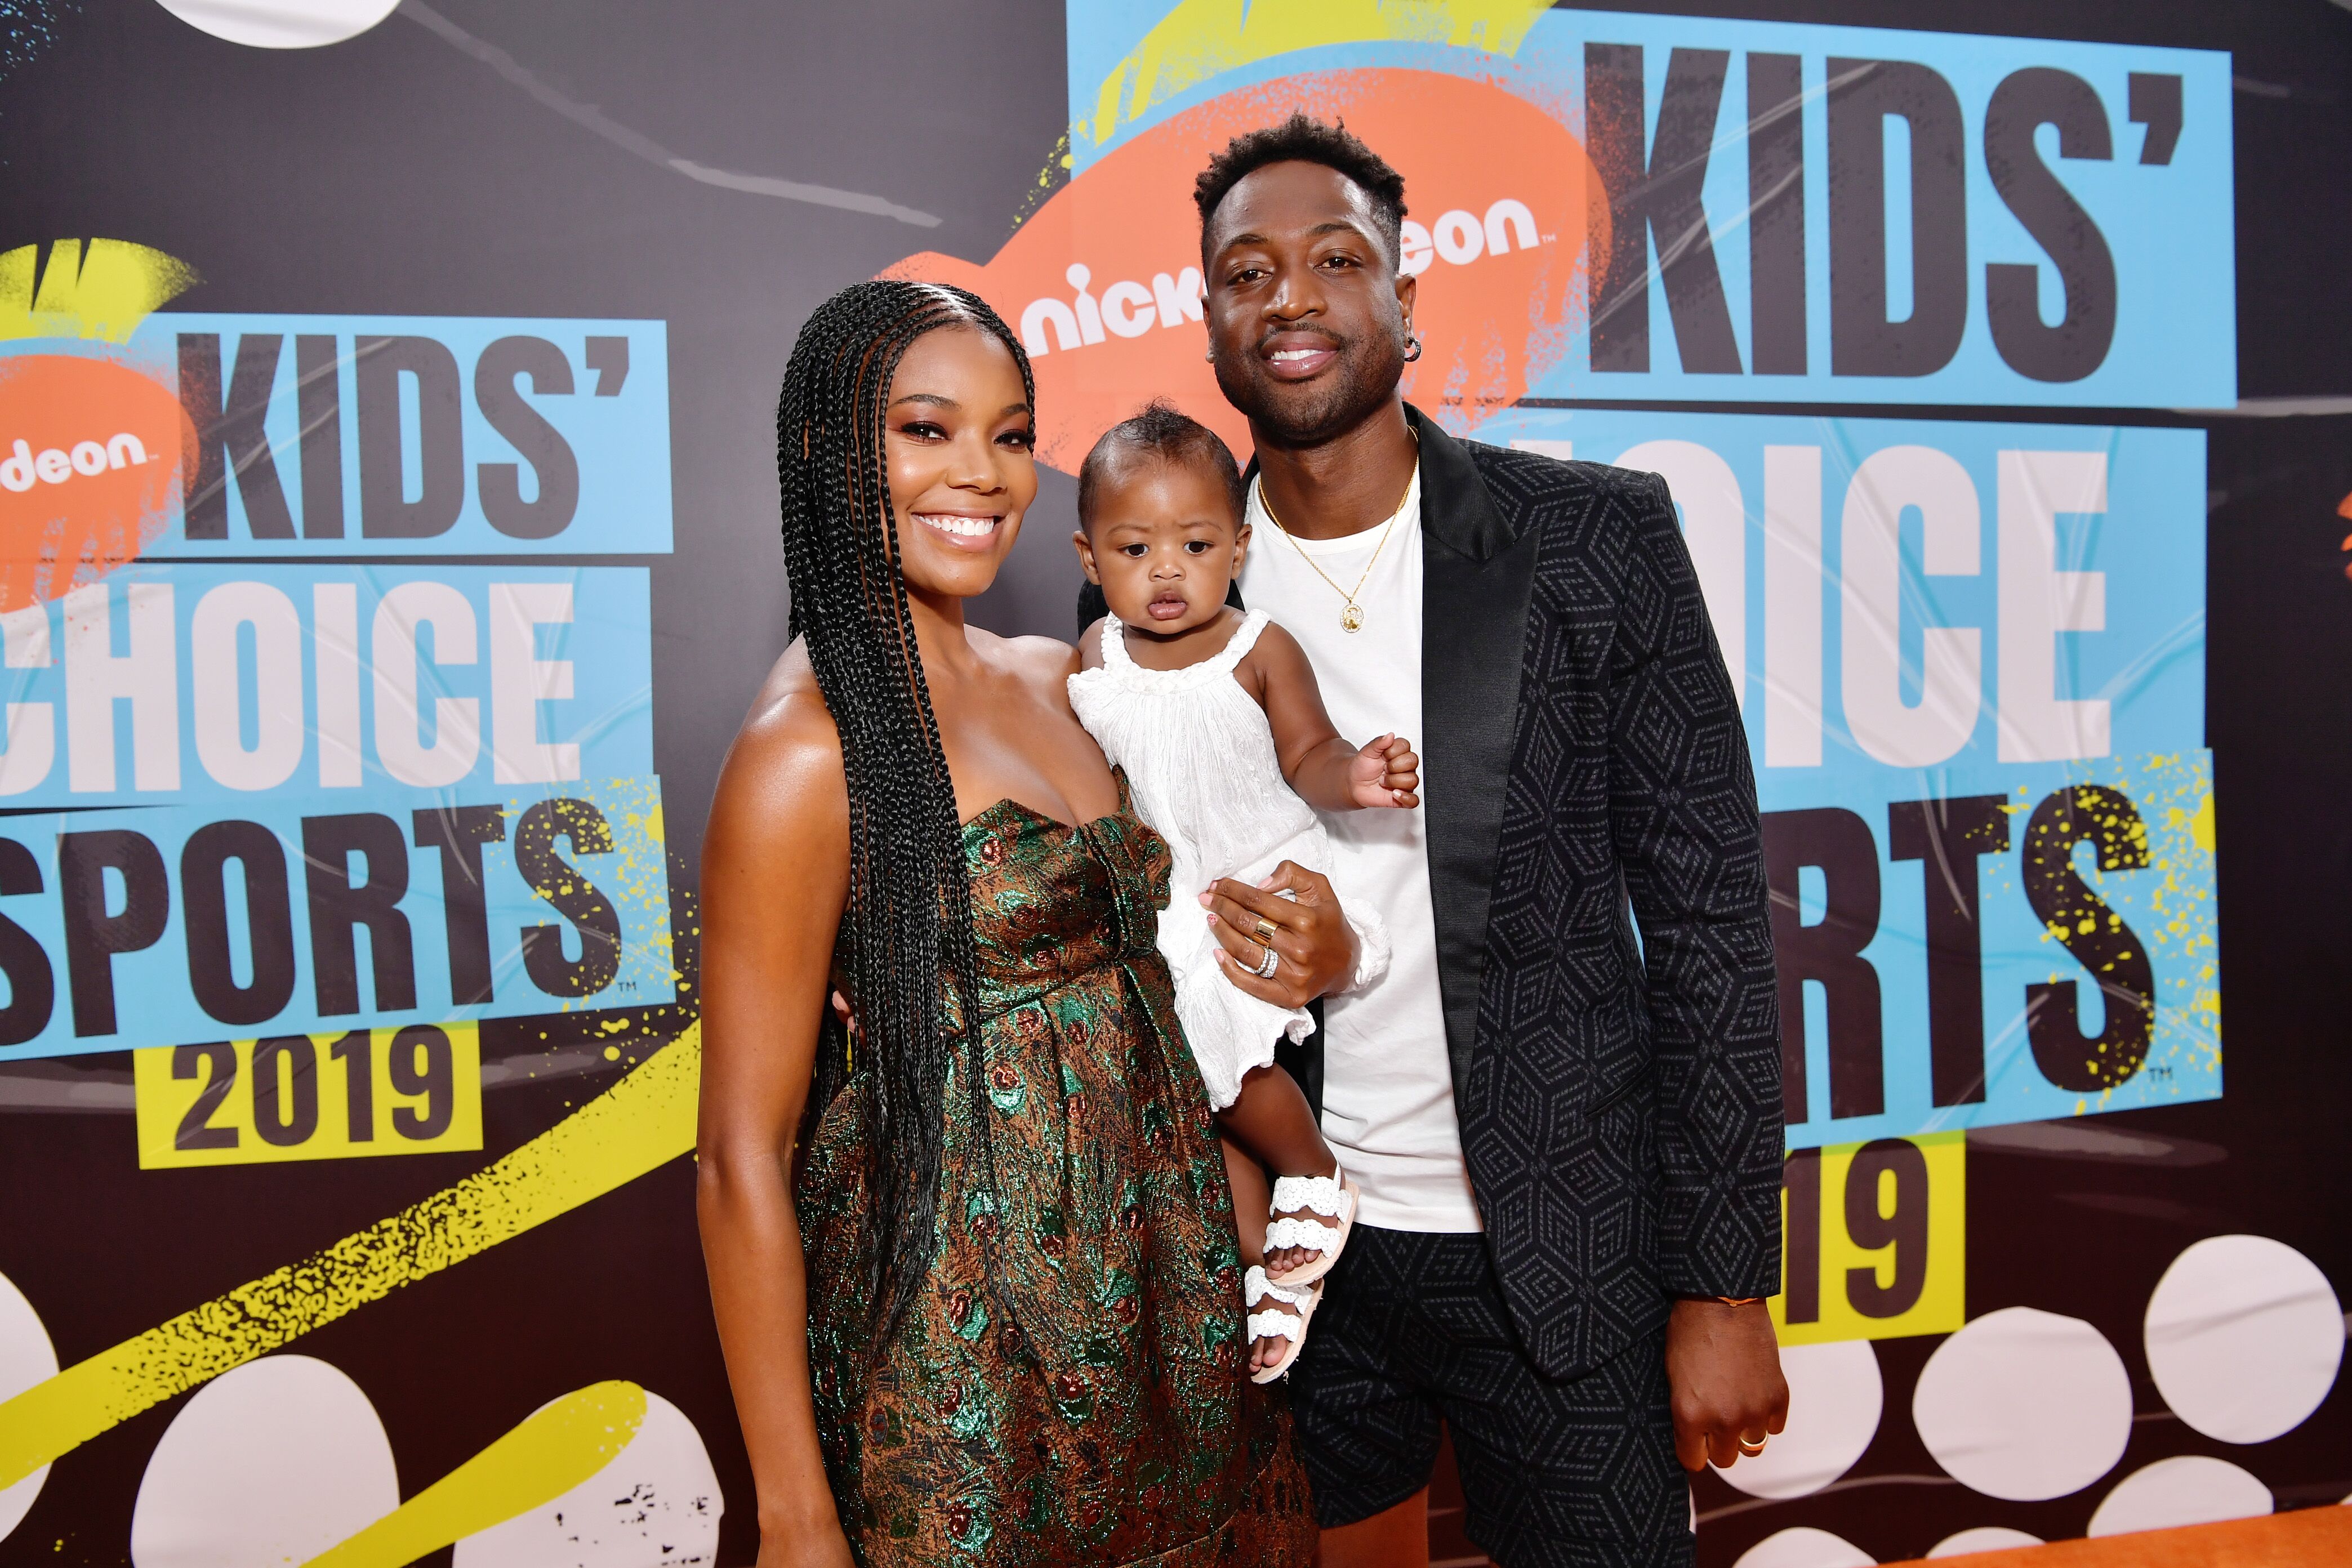 Gabrielle Union, Kaavia James Union Wade, and Dwyane Wade attend Nickelodeon Kids' Choice Sports 2019 at Barker Hangar on July 11, 2019 in Santa Monica, California | Photo: Getty Images